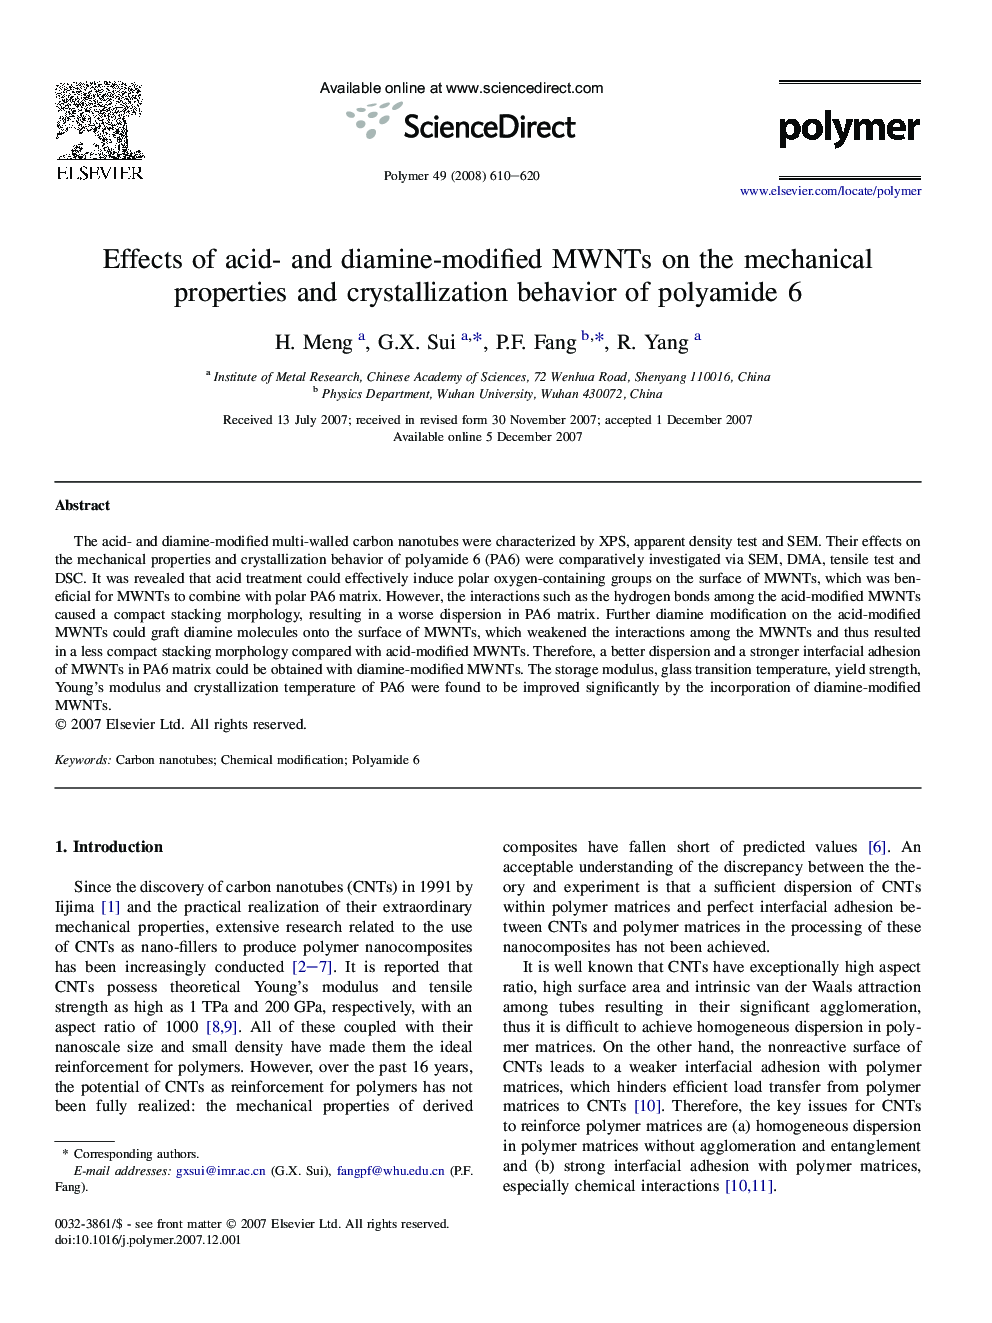 Effects of acid- and diamine-modified MWNTs on the mechanical properties and crystallization behavior of polyamide 6